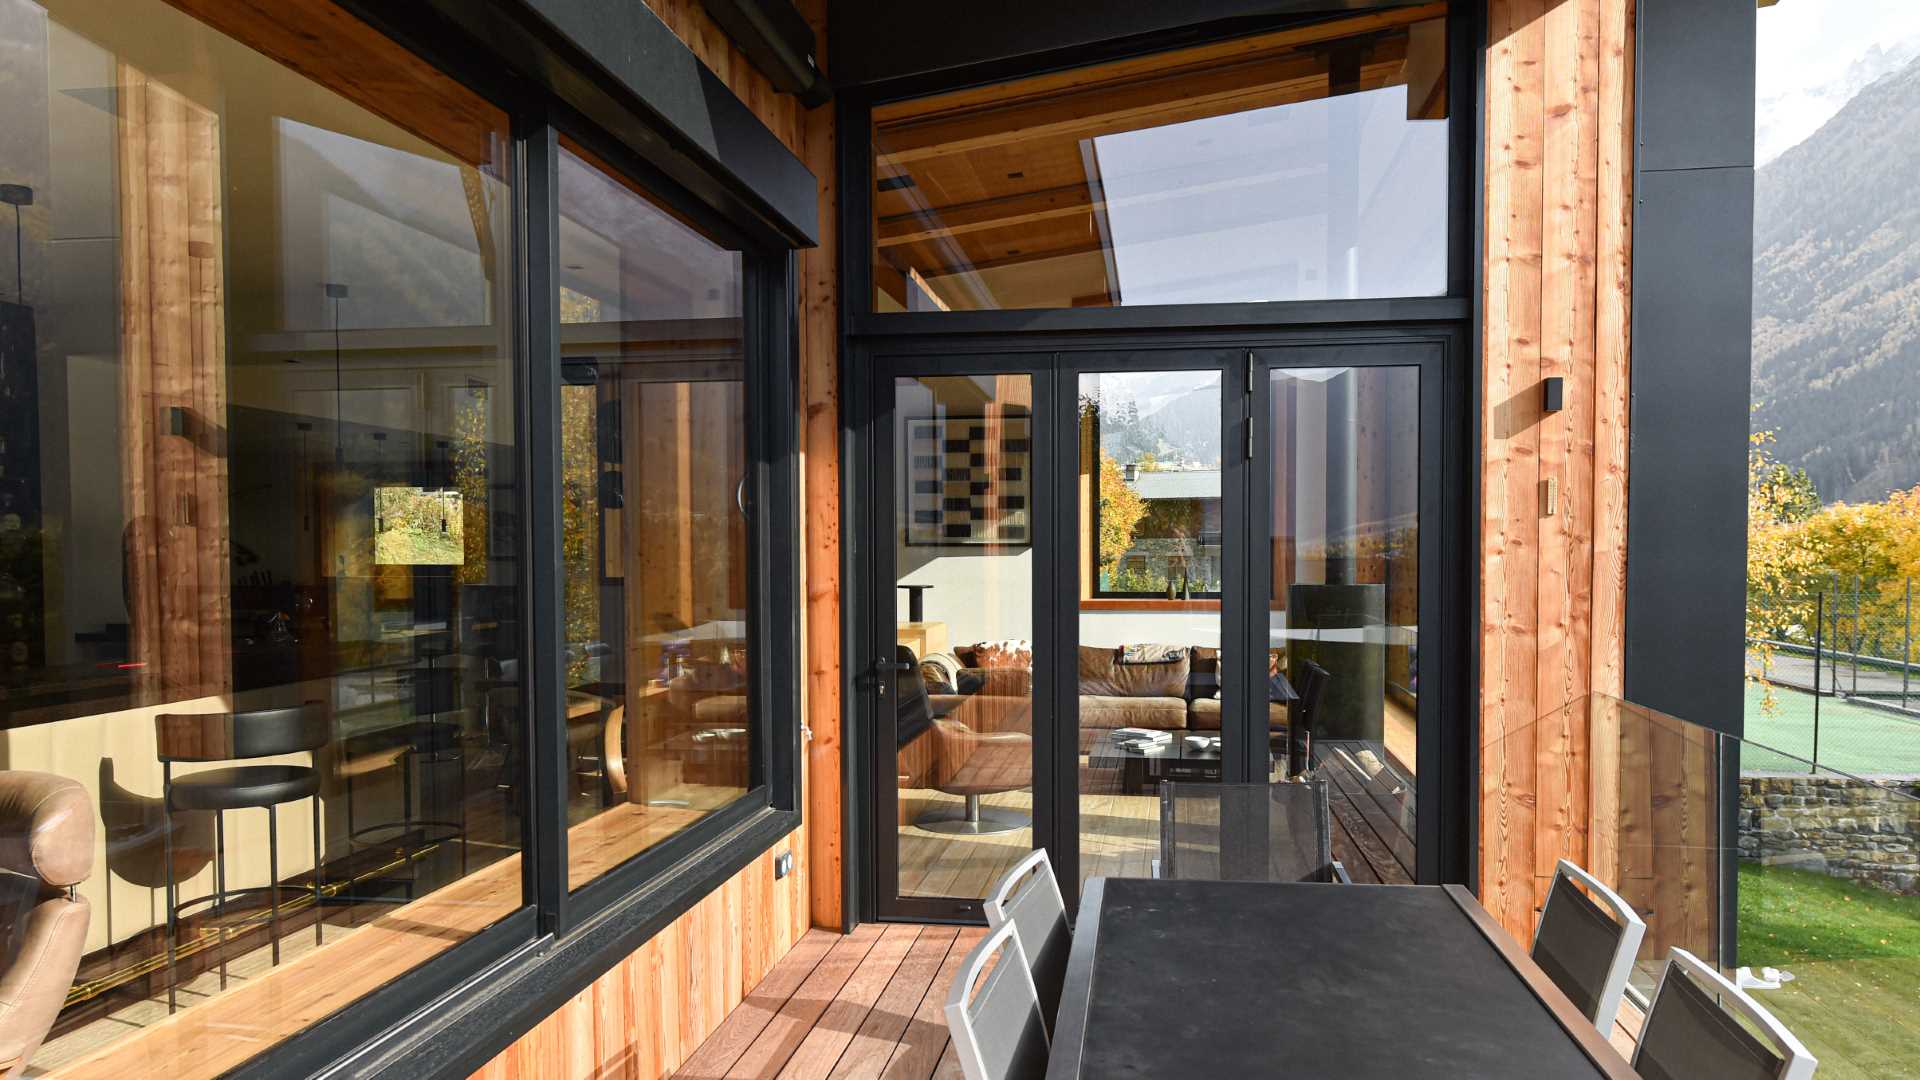 A modern home with wood siding, black window frames, and outdoor dining area.